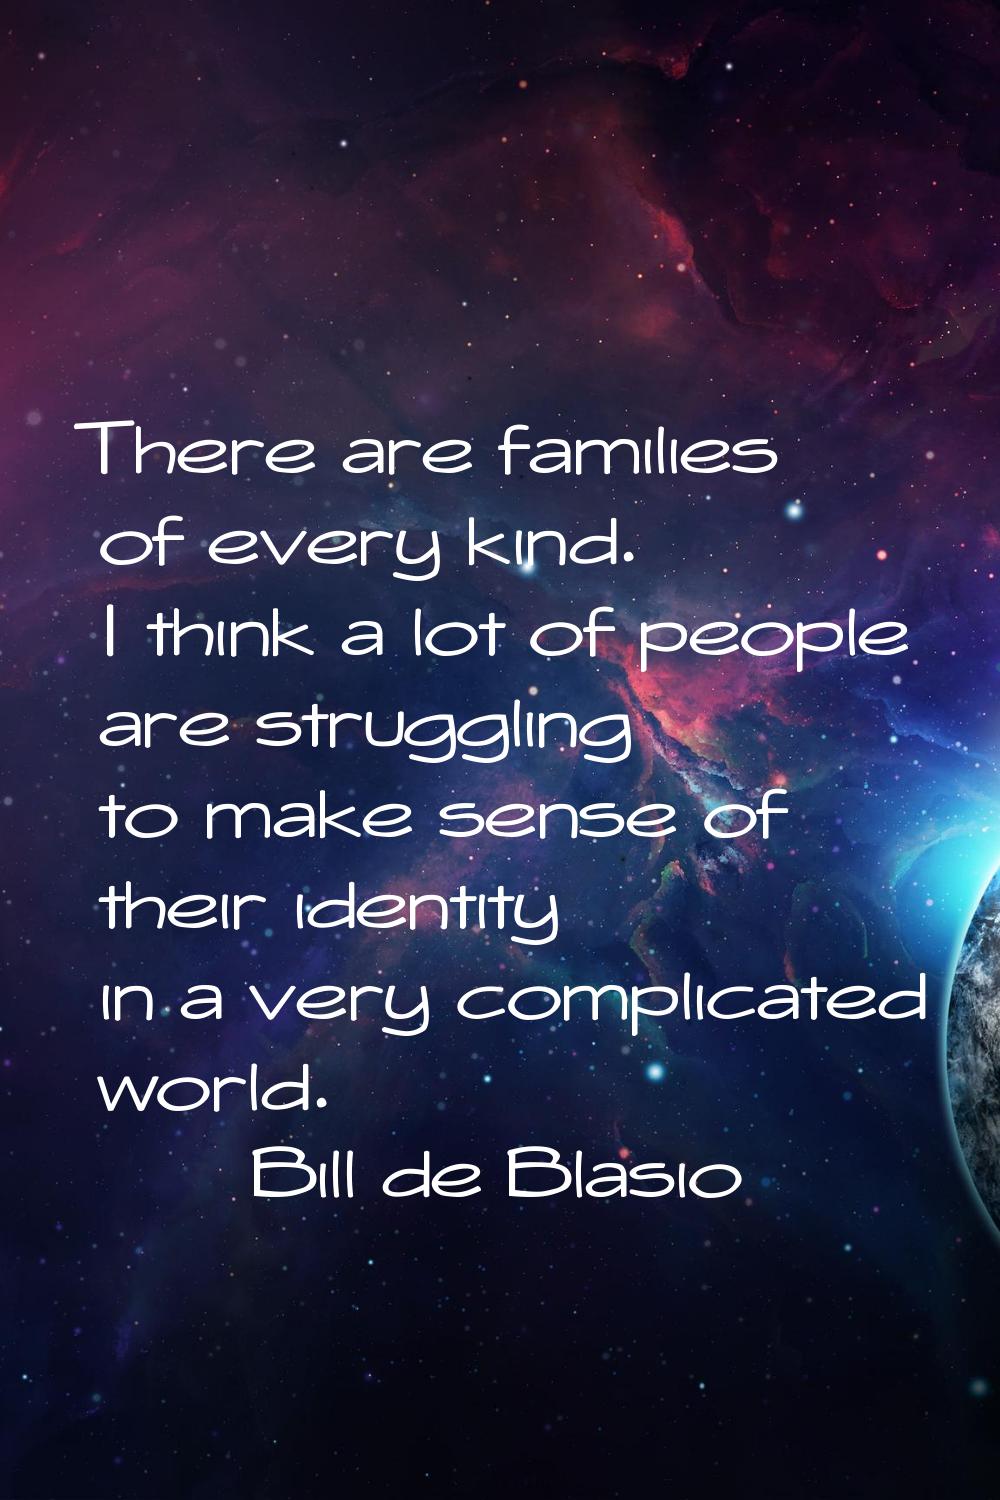 There are families of every kind. I think a lot of people are struggling to make sense of their ide